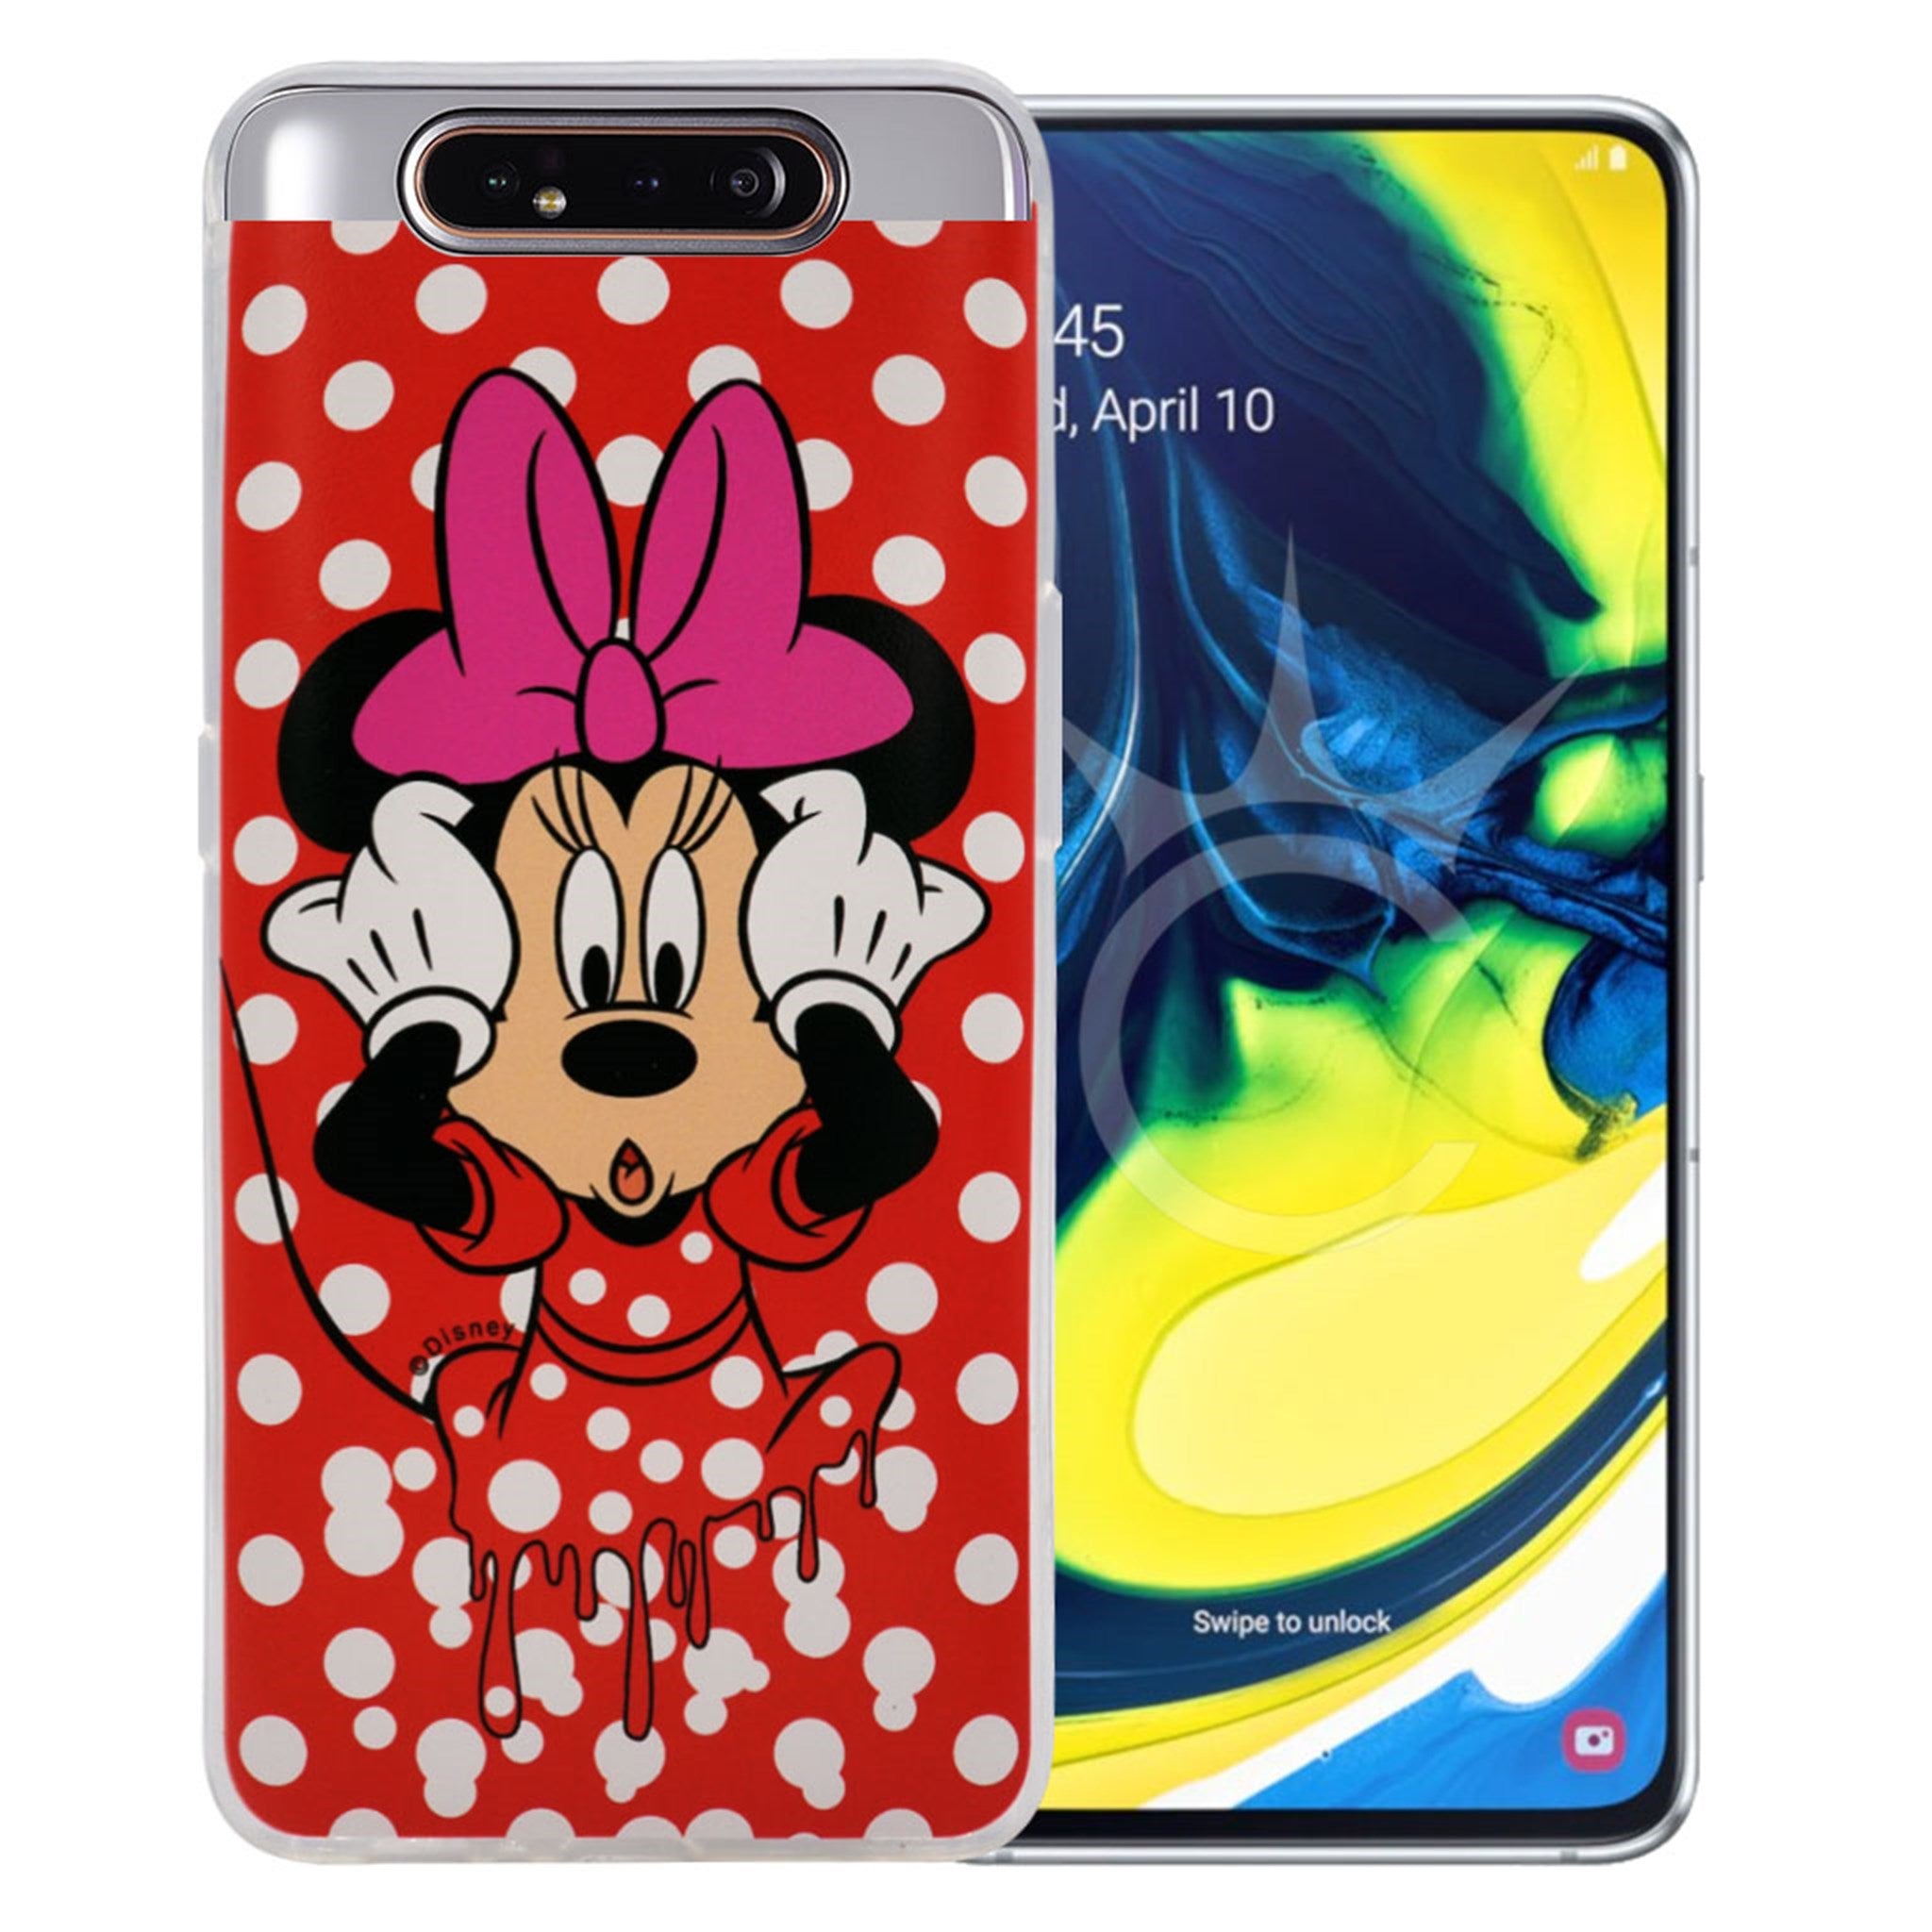 Minnie Mouse #16 Disney cover for Samsung Galaxy A80 - Red